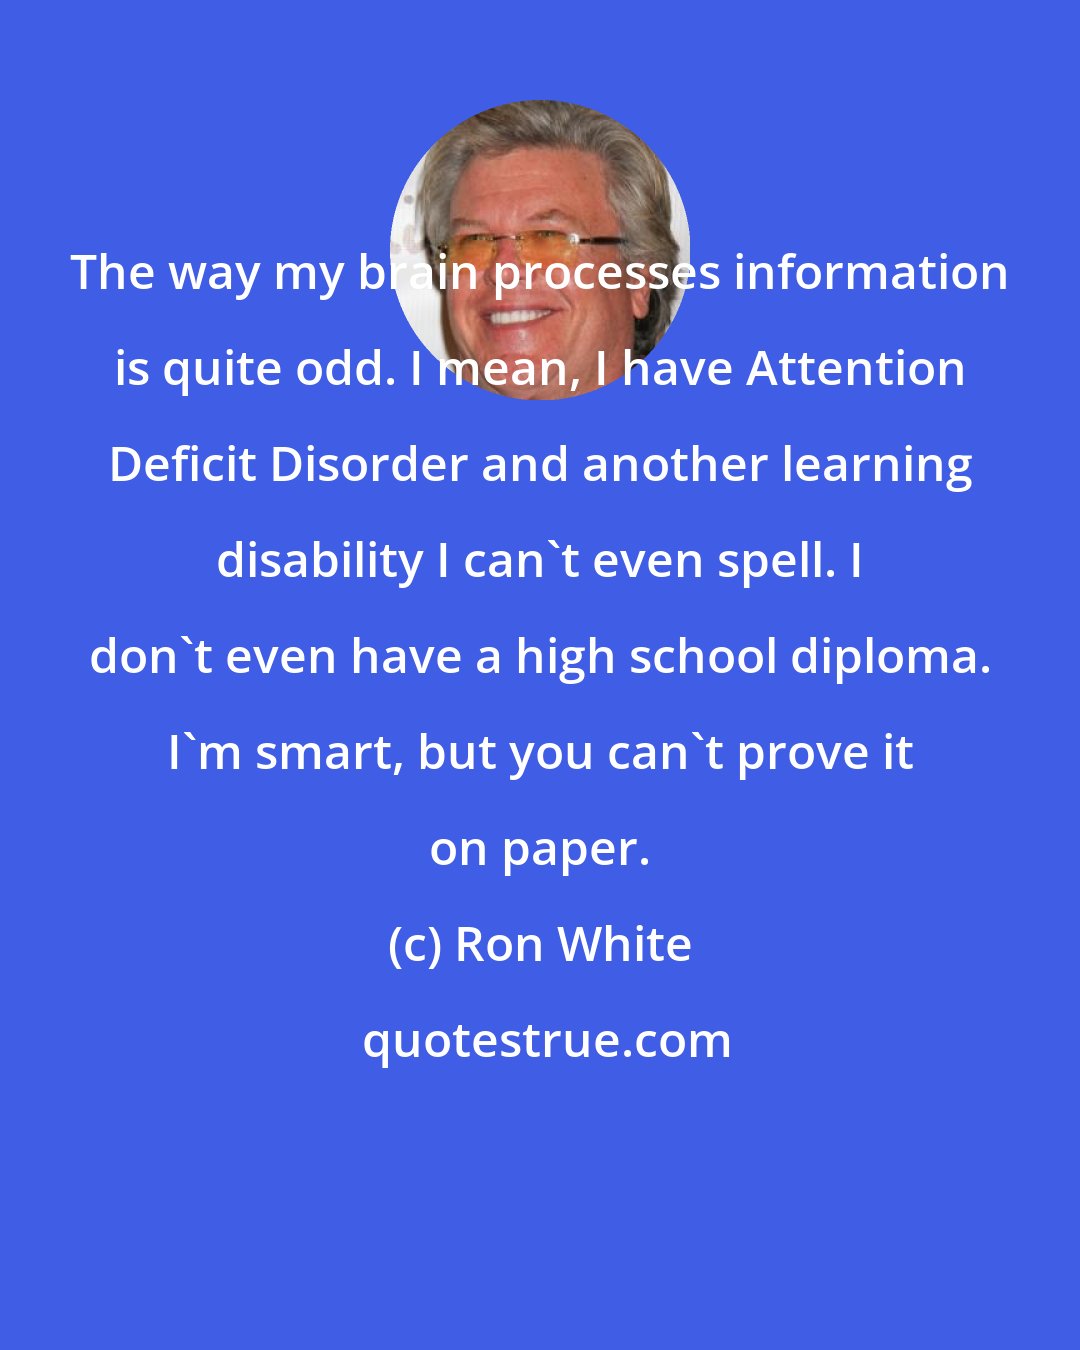 Ron White: The way my brain processes information is quite odd. I mean, I have Attention Deficit Disorder and another learning disability I can't even spell. I don't even have a high school diploma. I'm smart, but you can't prove it on paper.